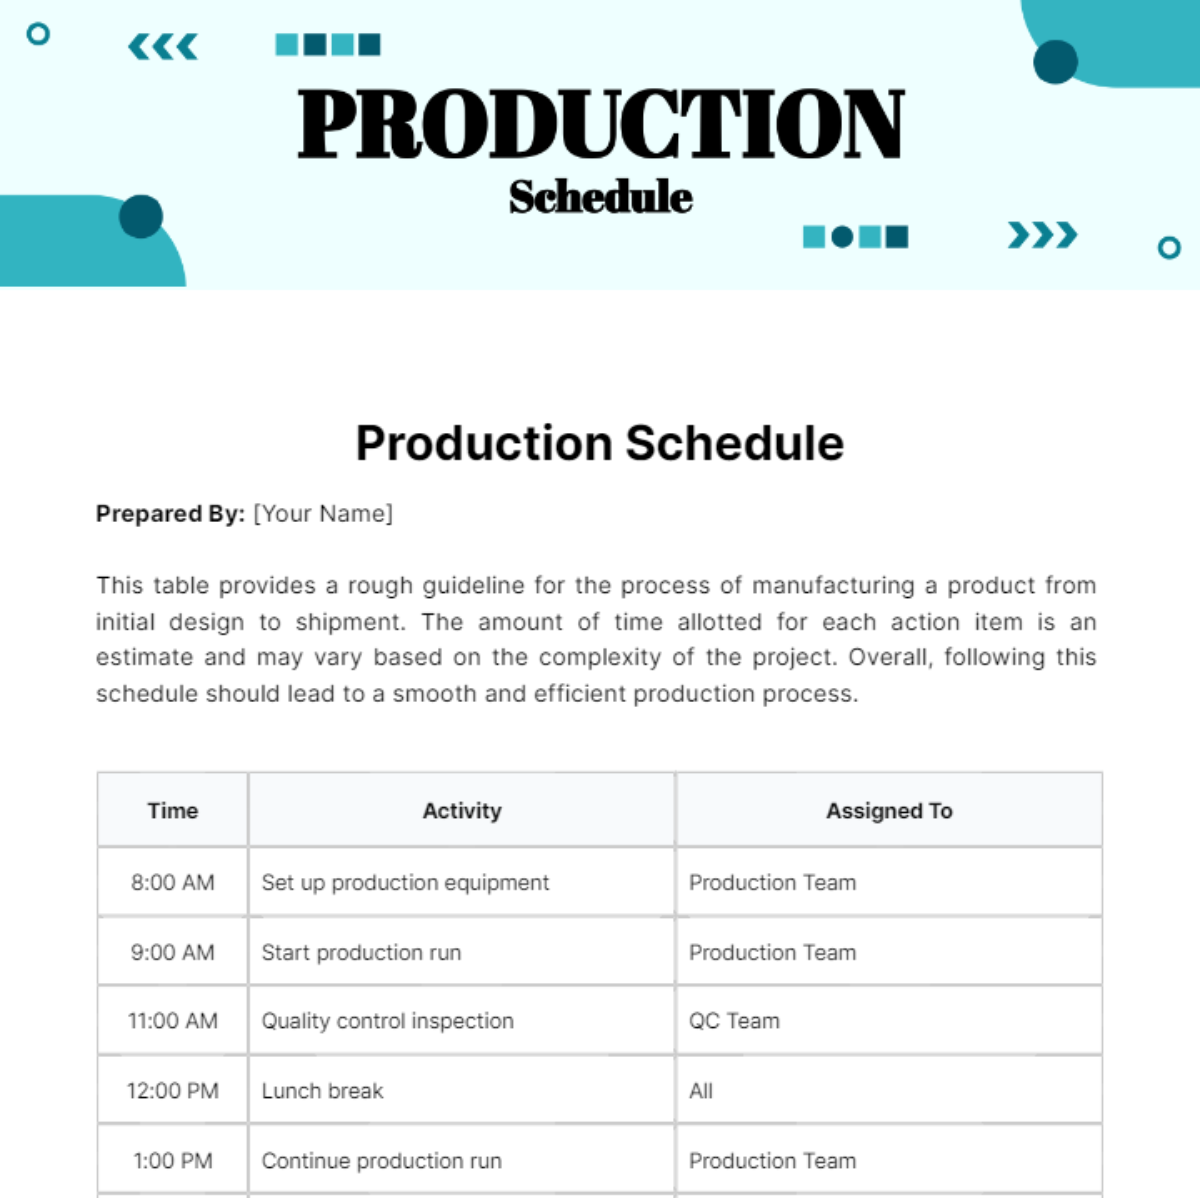 Production Schedule Template